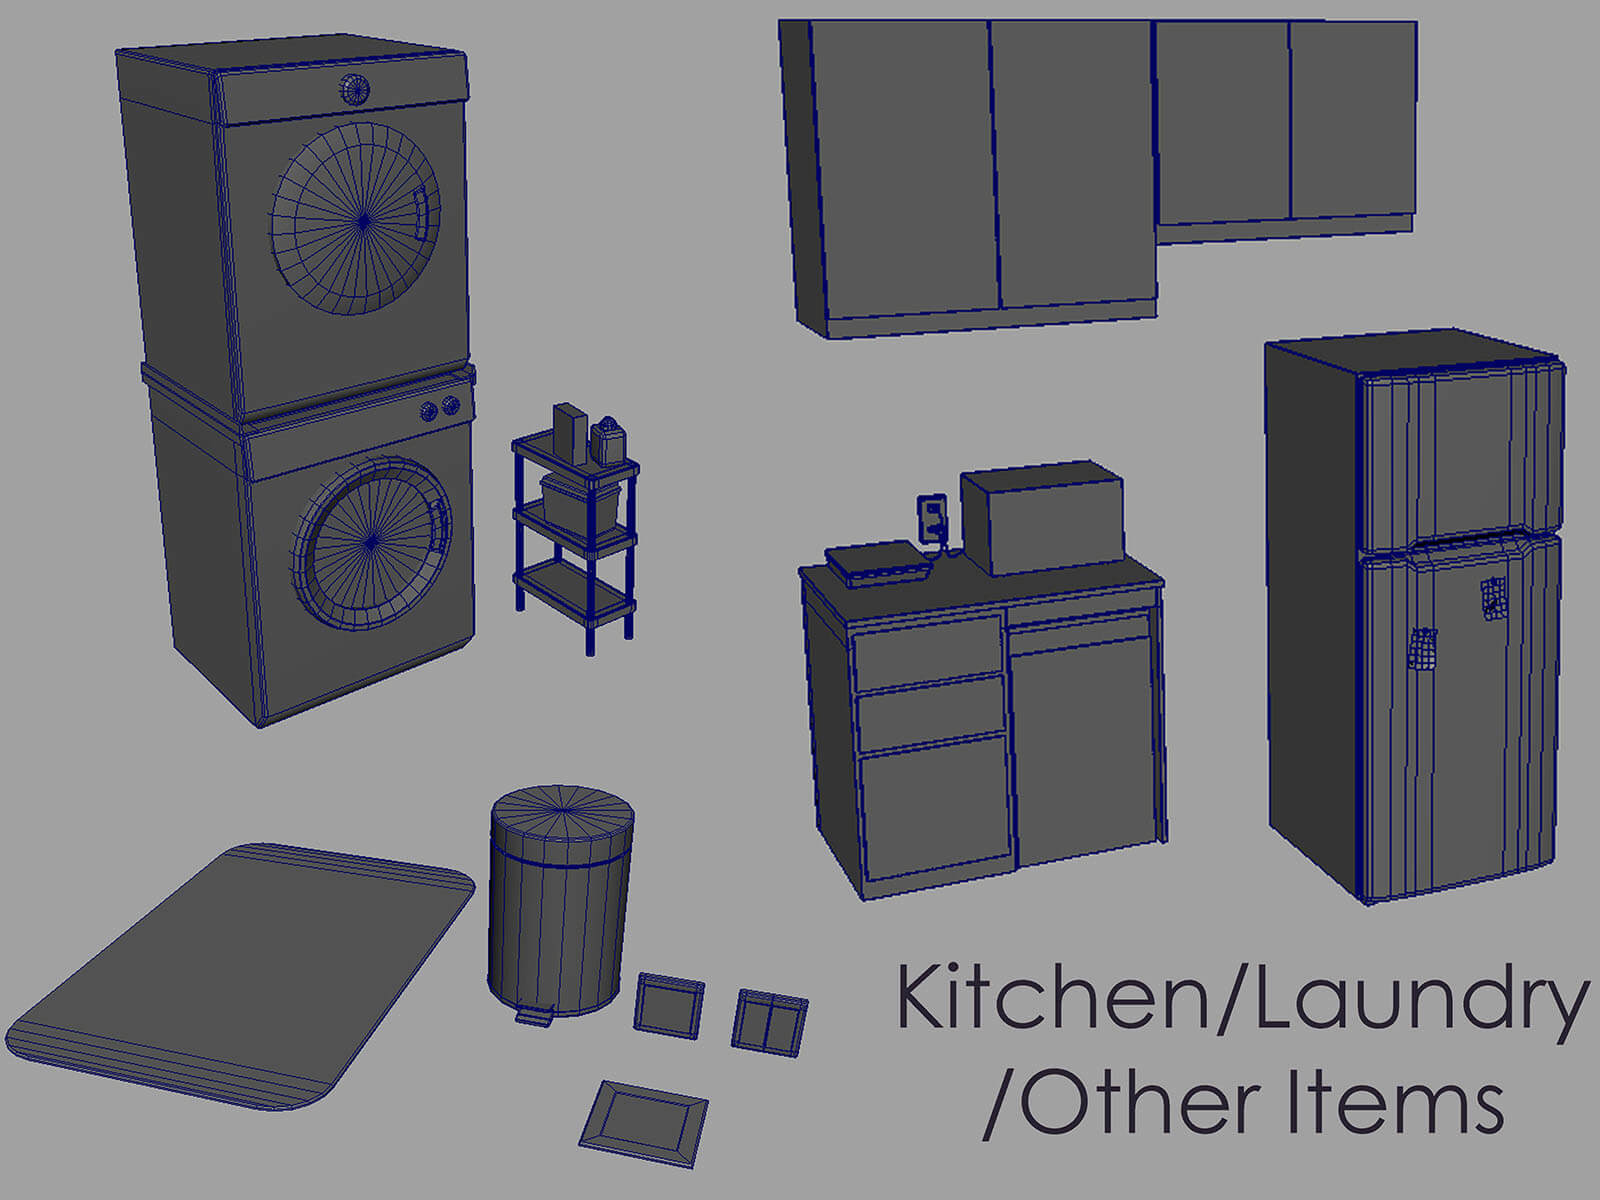 Collection of untextured 3D objects used in the scene's kitchen and laundry area